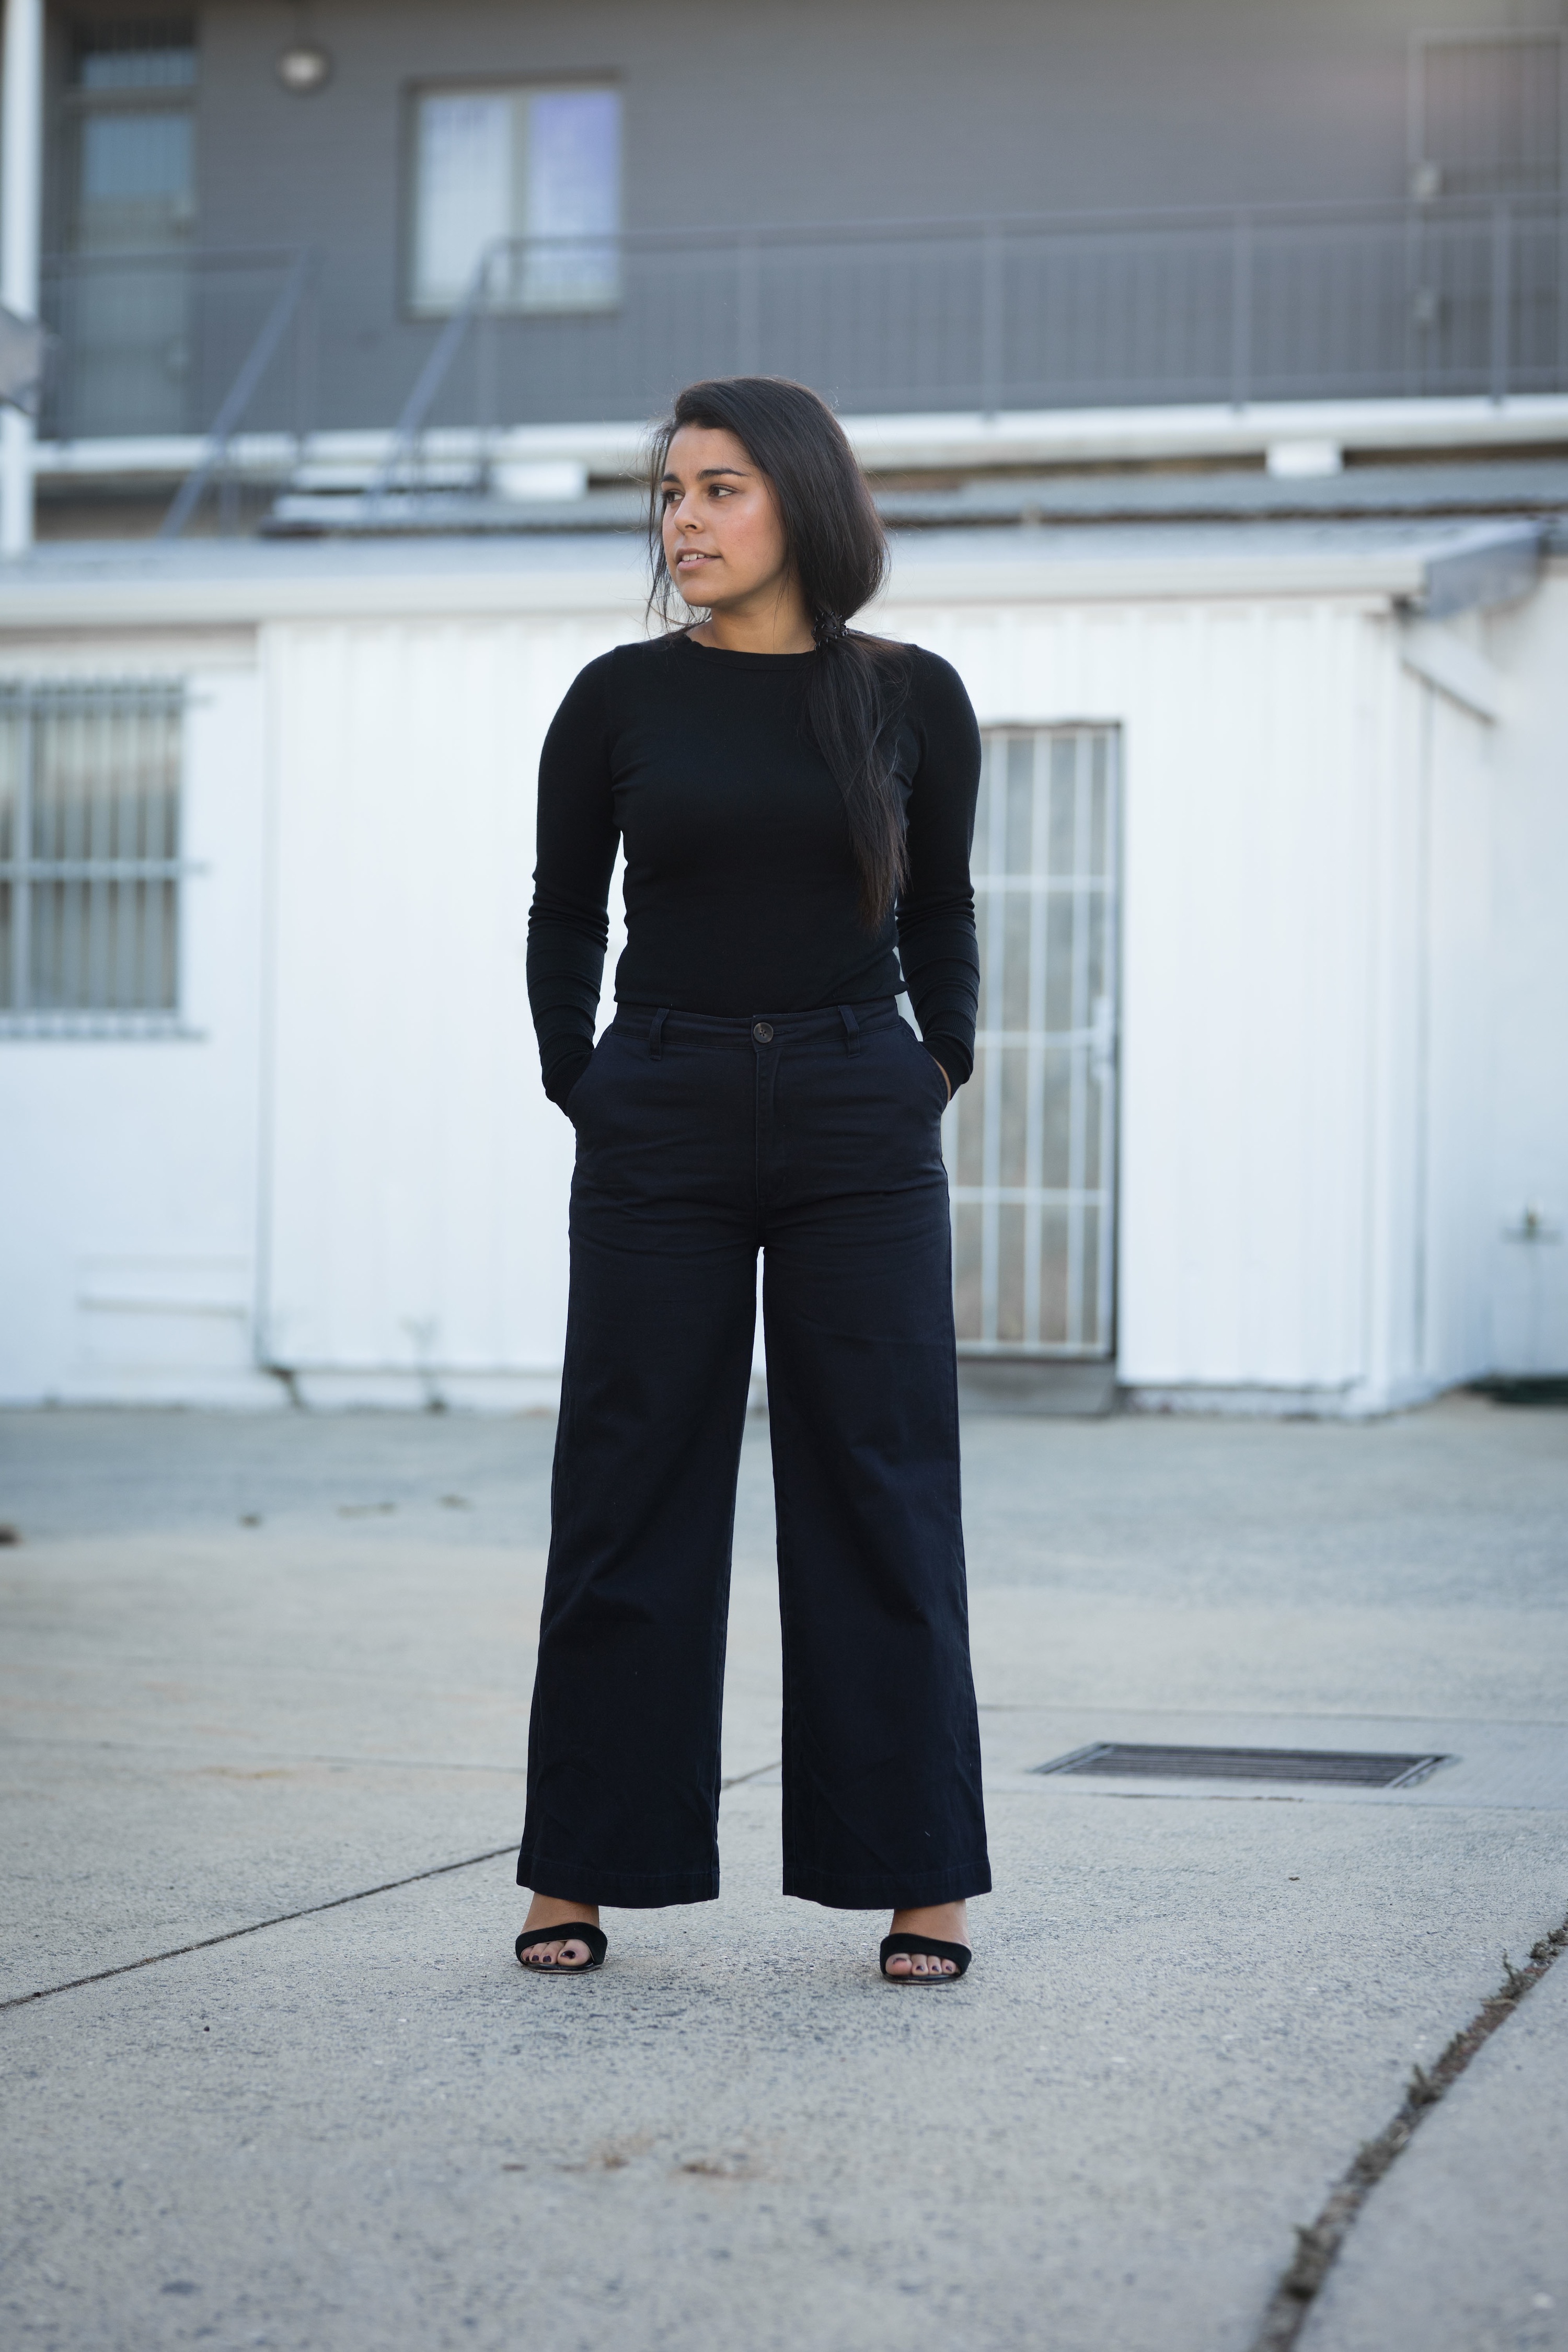 The Tailored Pant